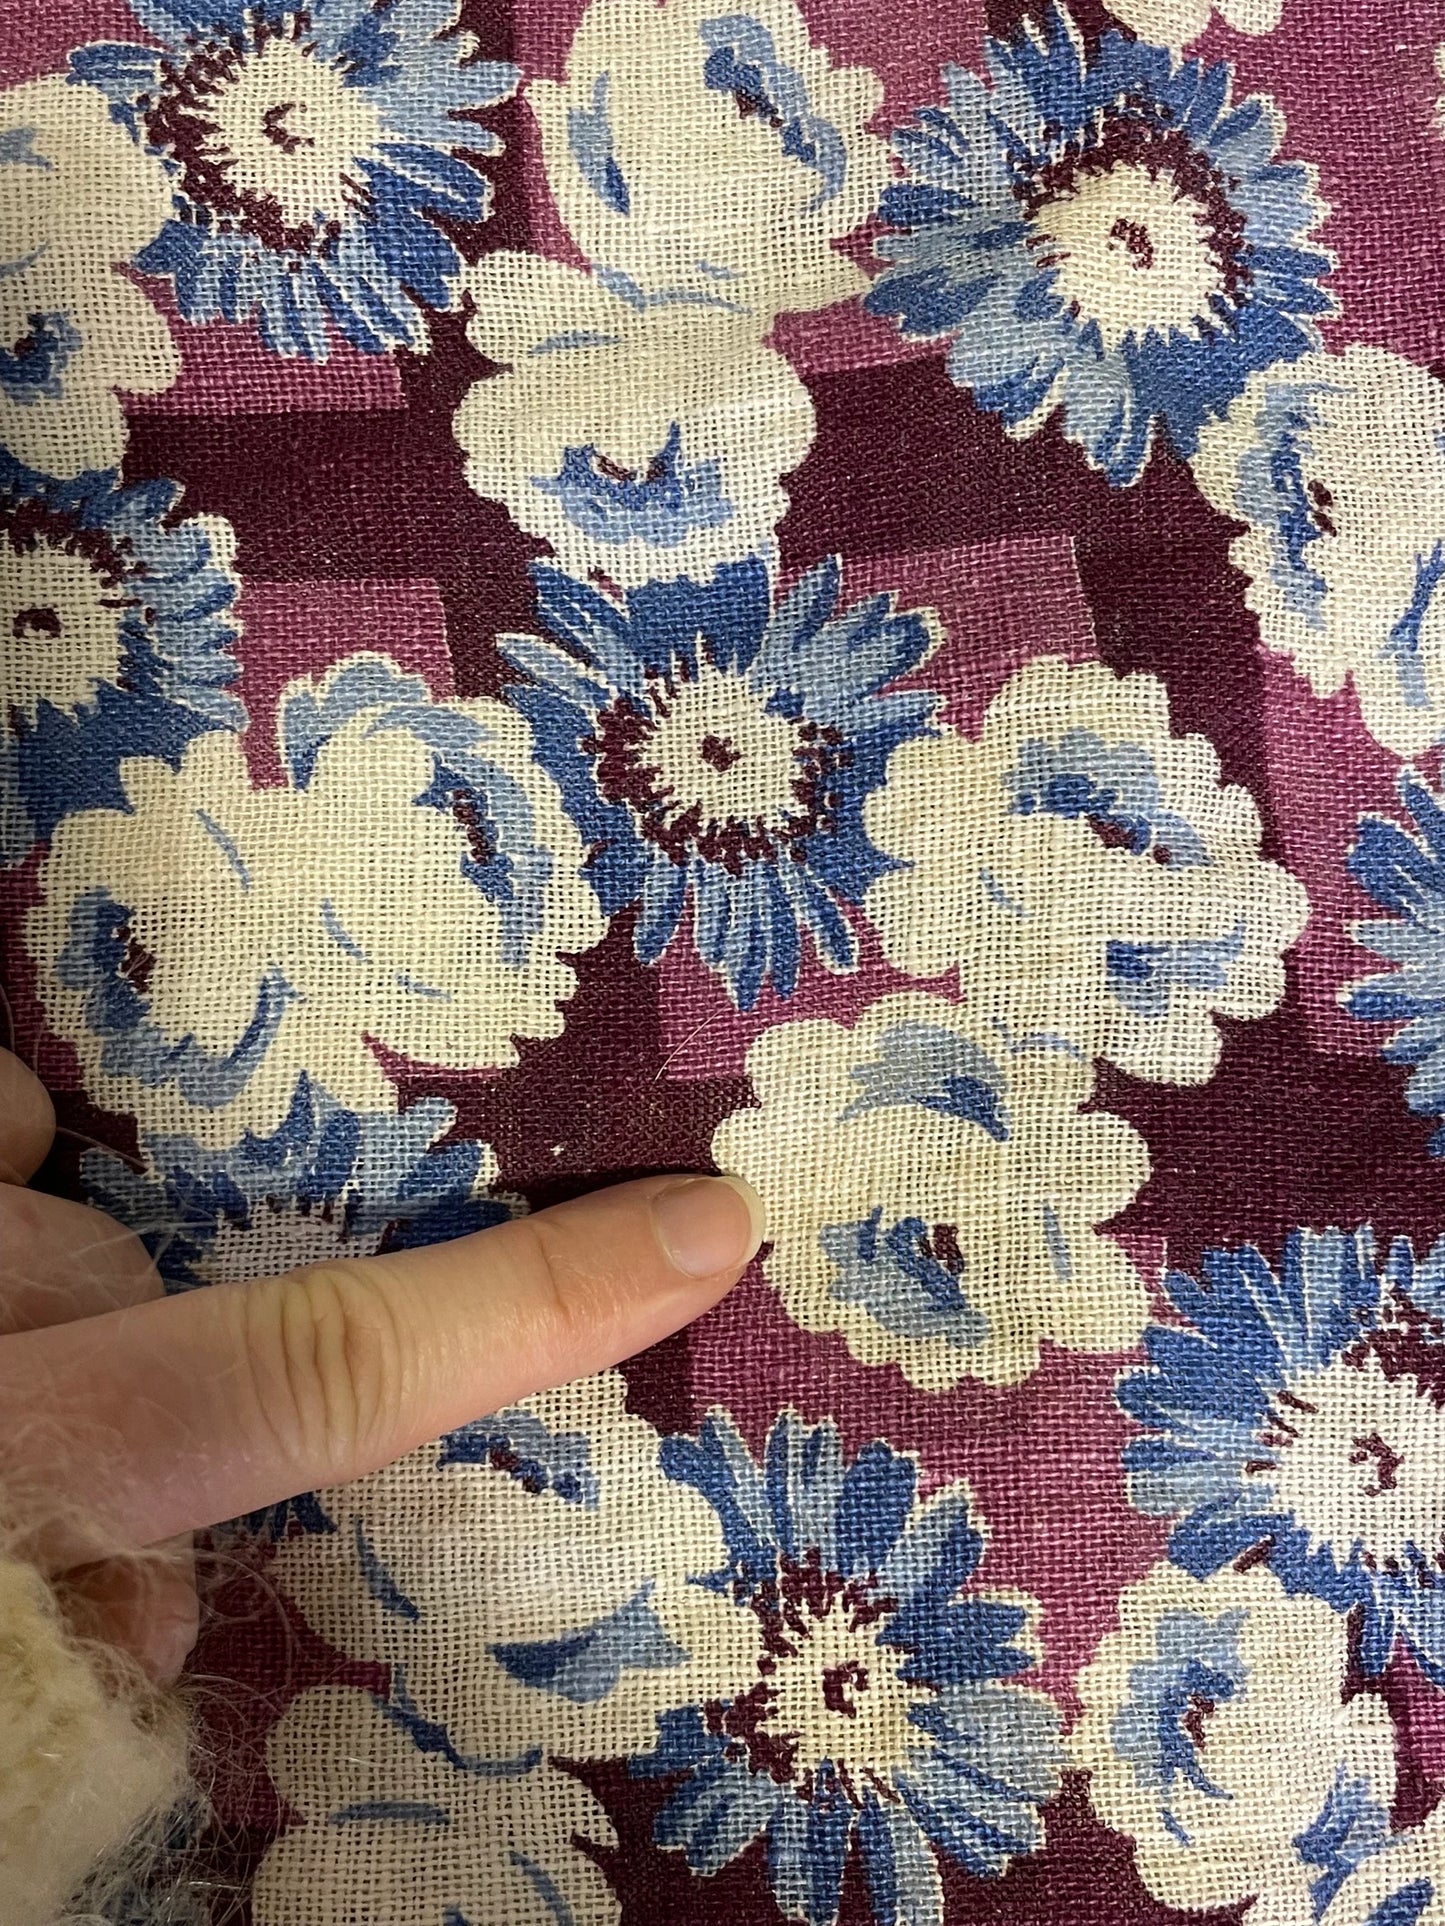 1940s Purple Floral Print Cotton Fabric, 3.4 Yards, Vintage Sewing Fabric